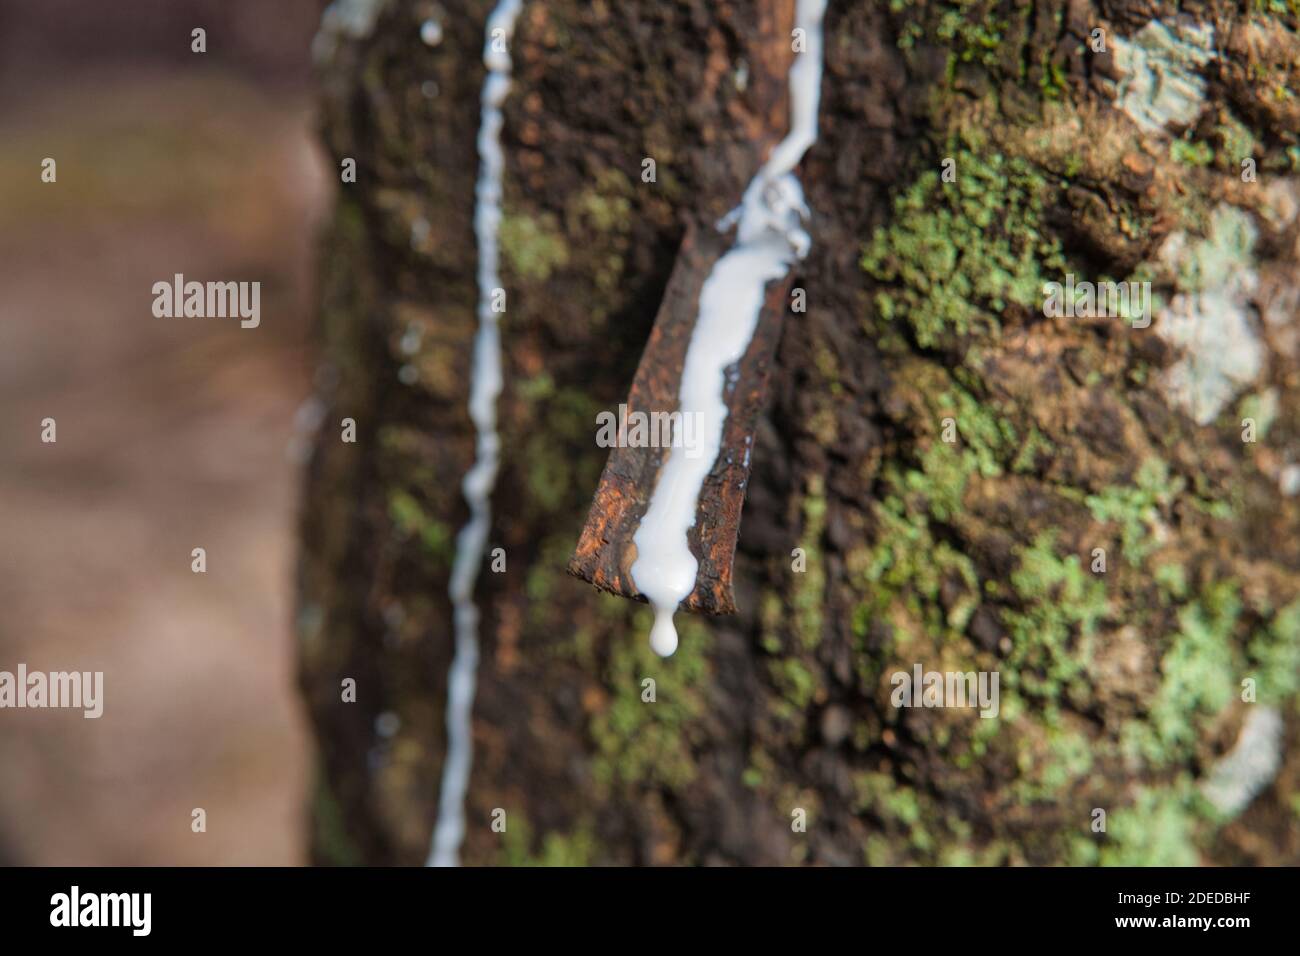 White latex runs from cuts in the tree trunk on a rubber plantation near Malacca, Malaysia Stock Photo